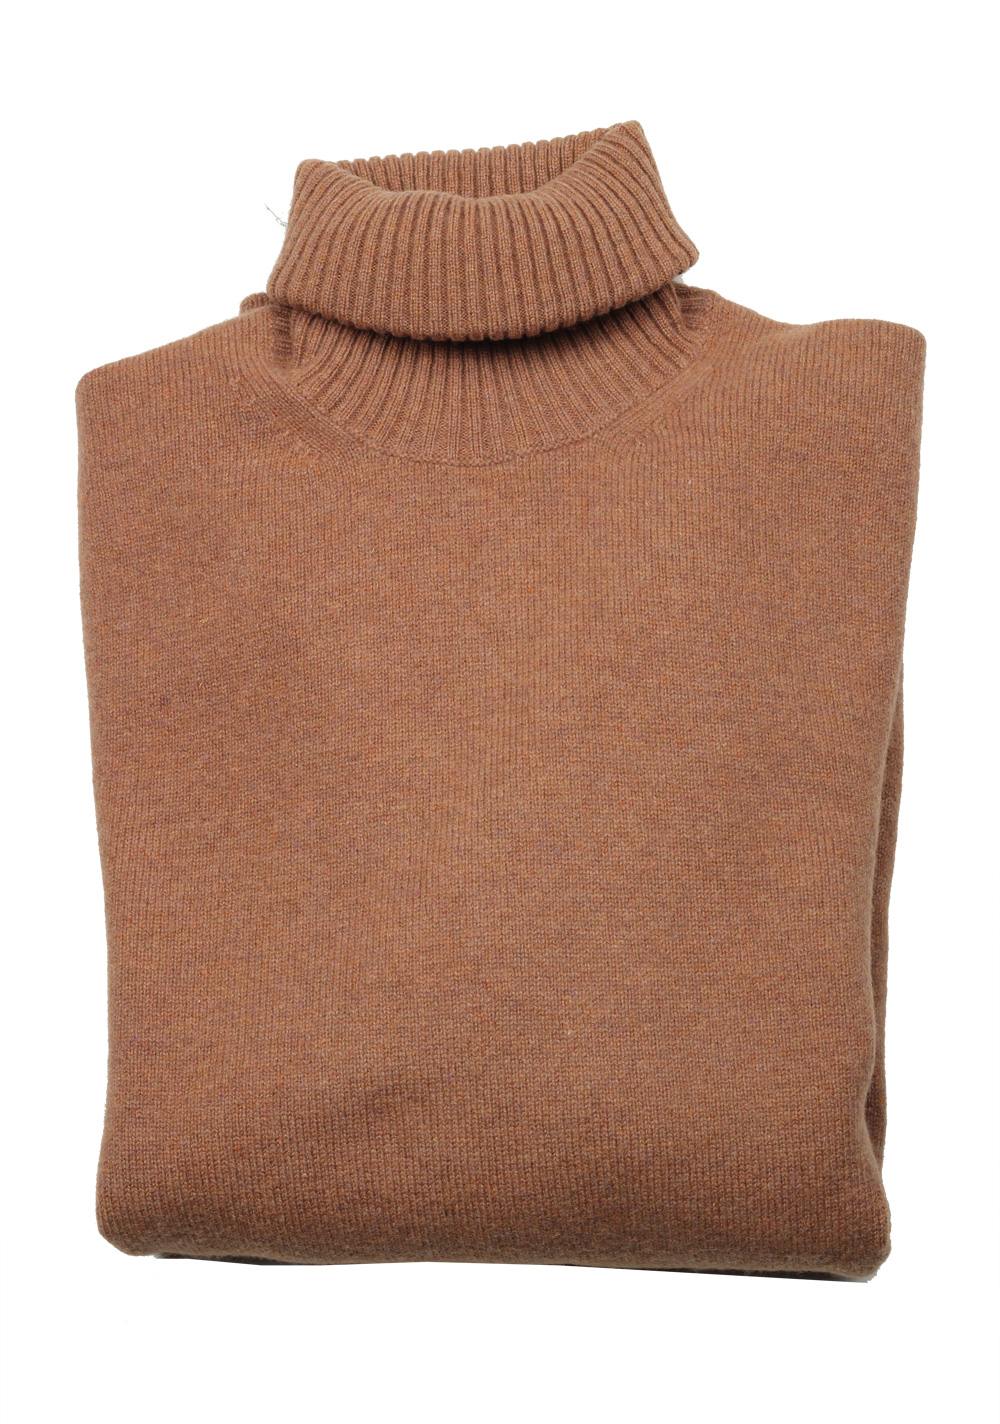 TOM FORD Brown Turtleneck Sweater Size 48 / 38R U.S. In Wool | Costume Limité